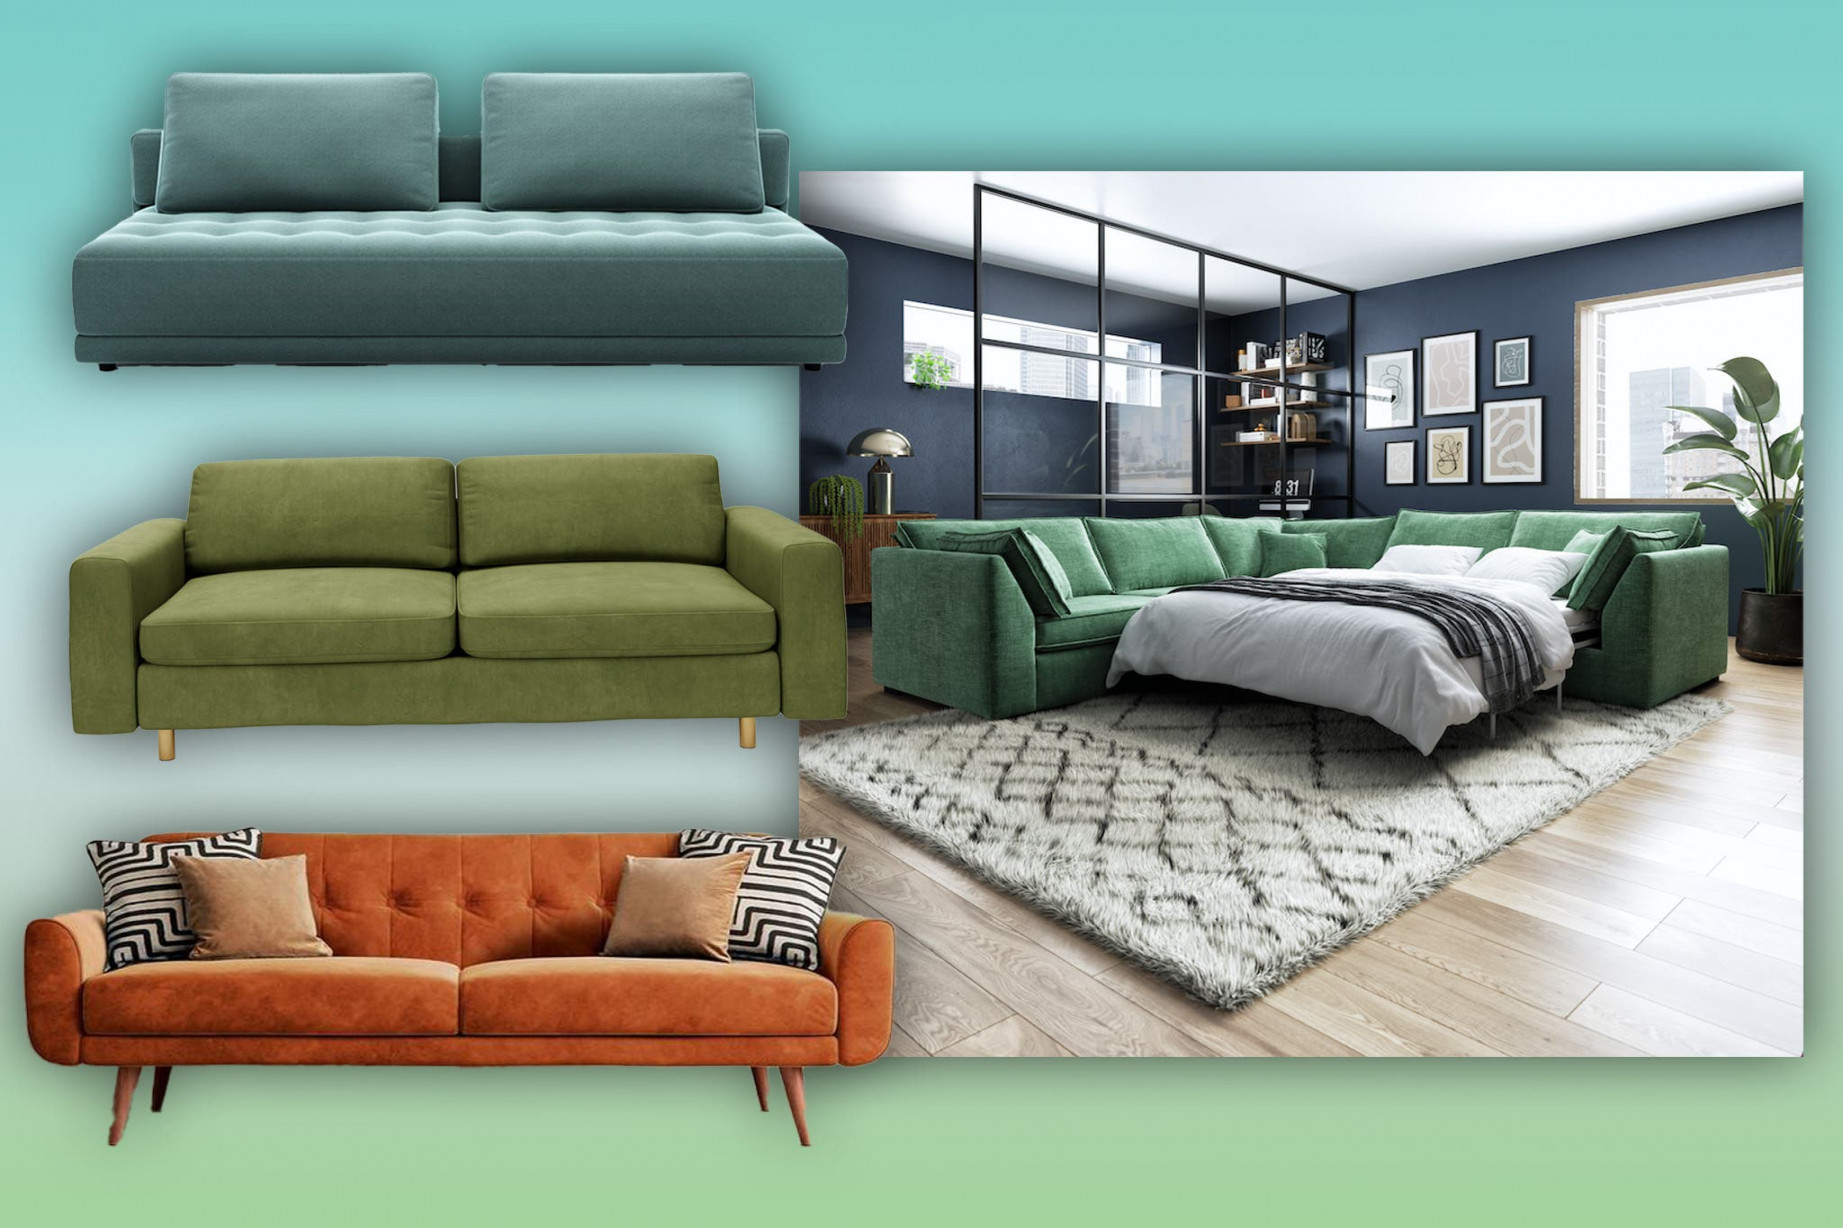 Best sofa beds : Cheap, corner and space-saving options  The